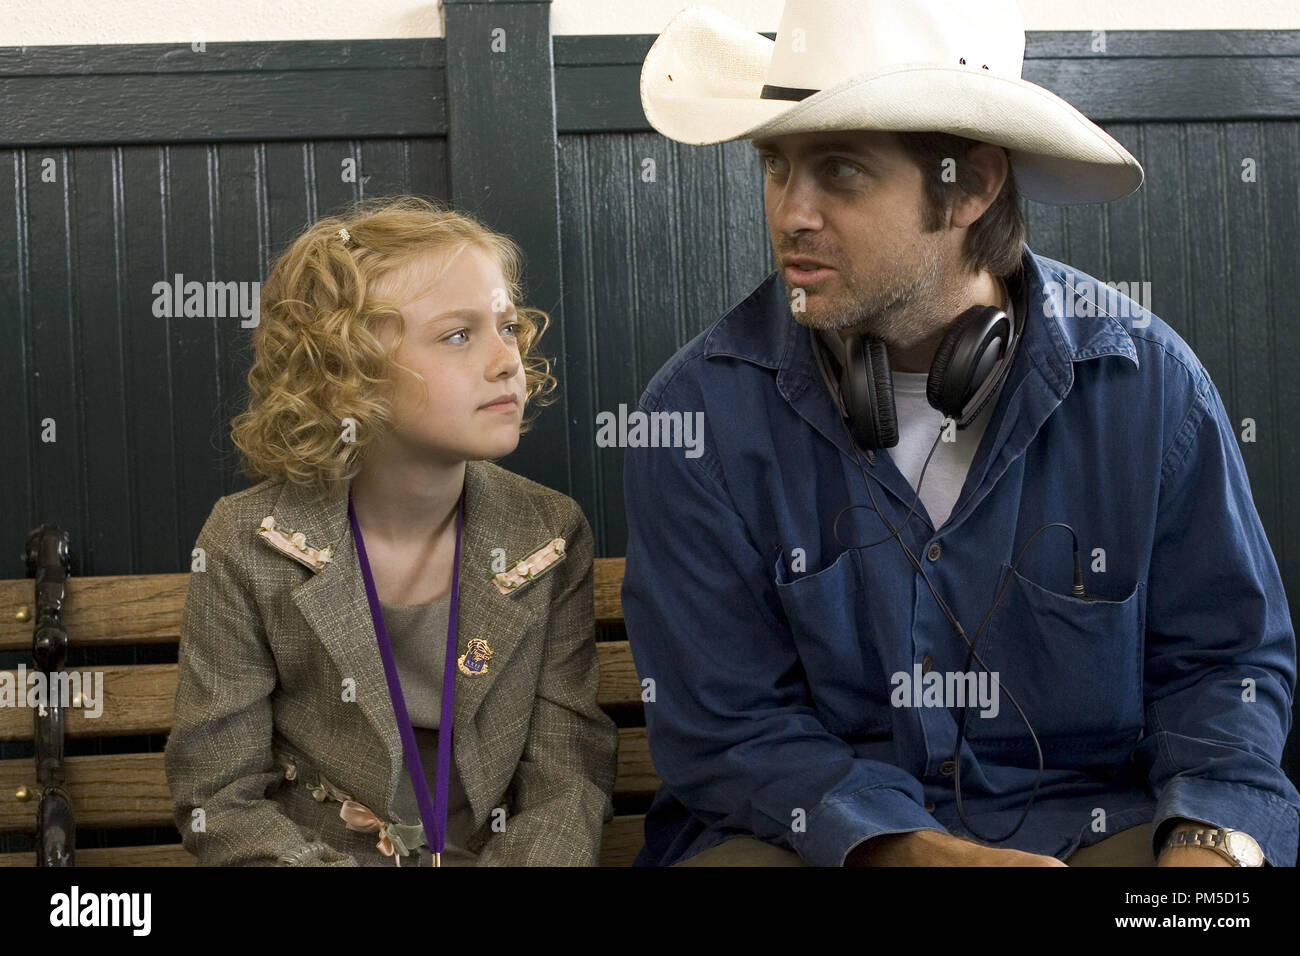 Film Still / Publicity Still from 'Dreamer: Inspired by a True Story'  Dakota Fanning, writer / director John Gatins © 2005 Dream Works  Photo Credit: Joe Lederer  File Reference # 307361344THA  For Editorial Use Only -  All Rights Reserved Stock Photo